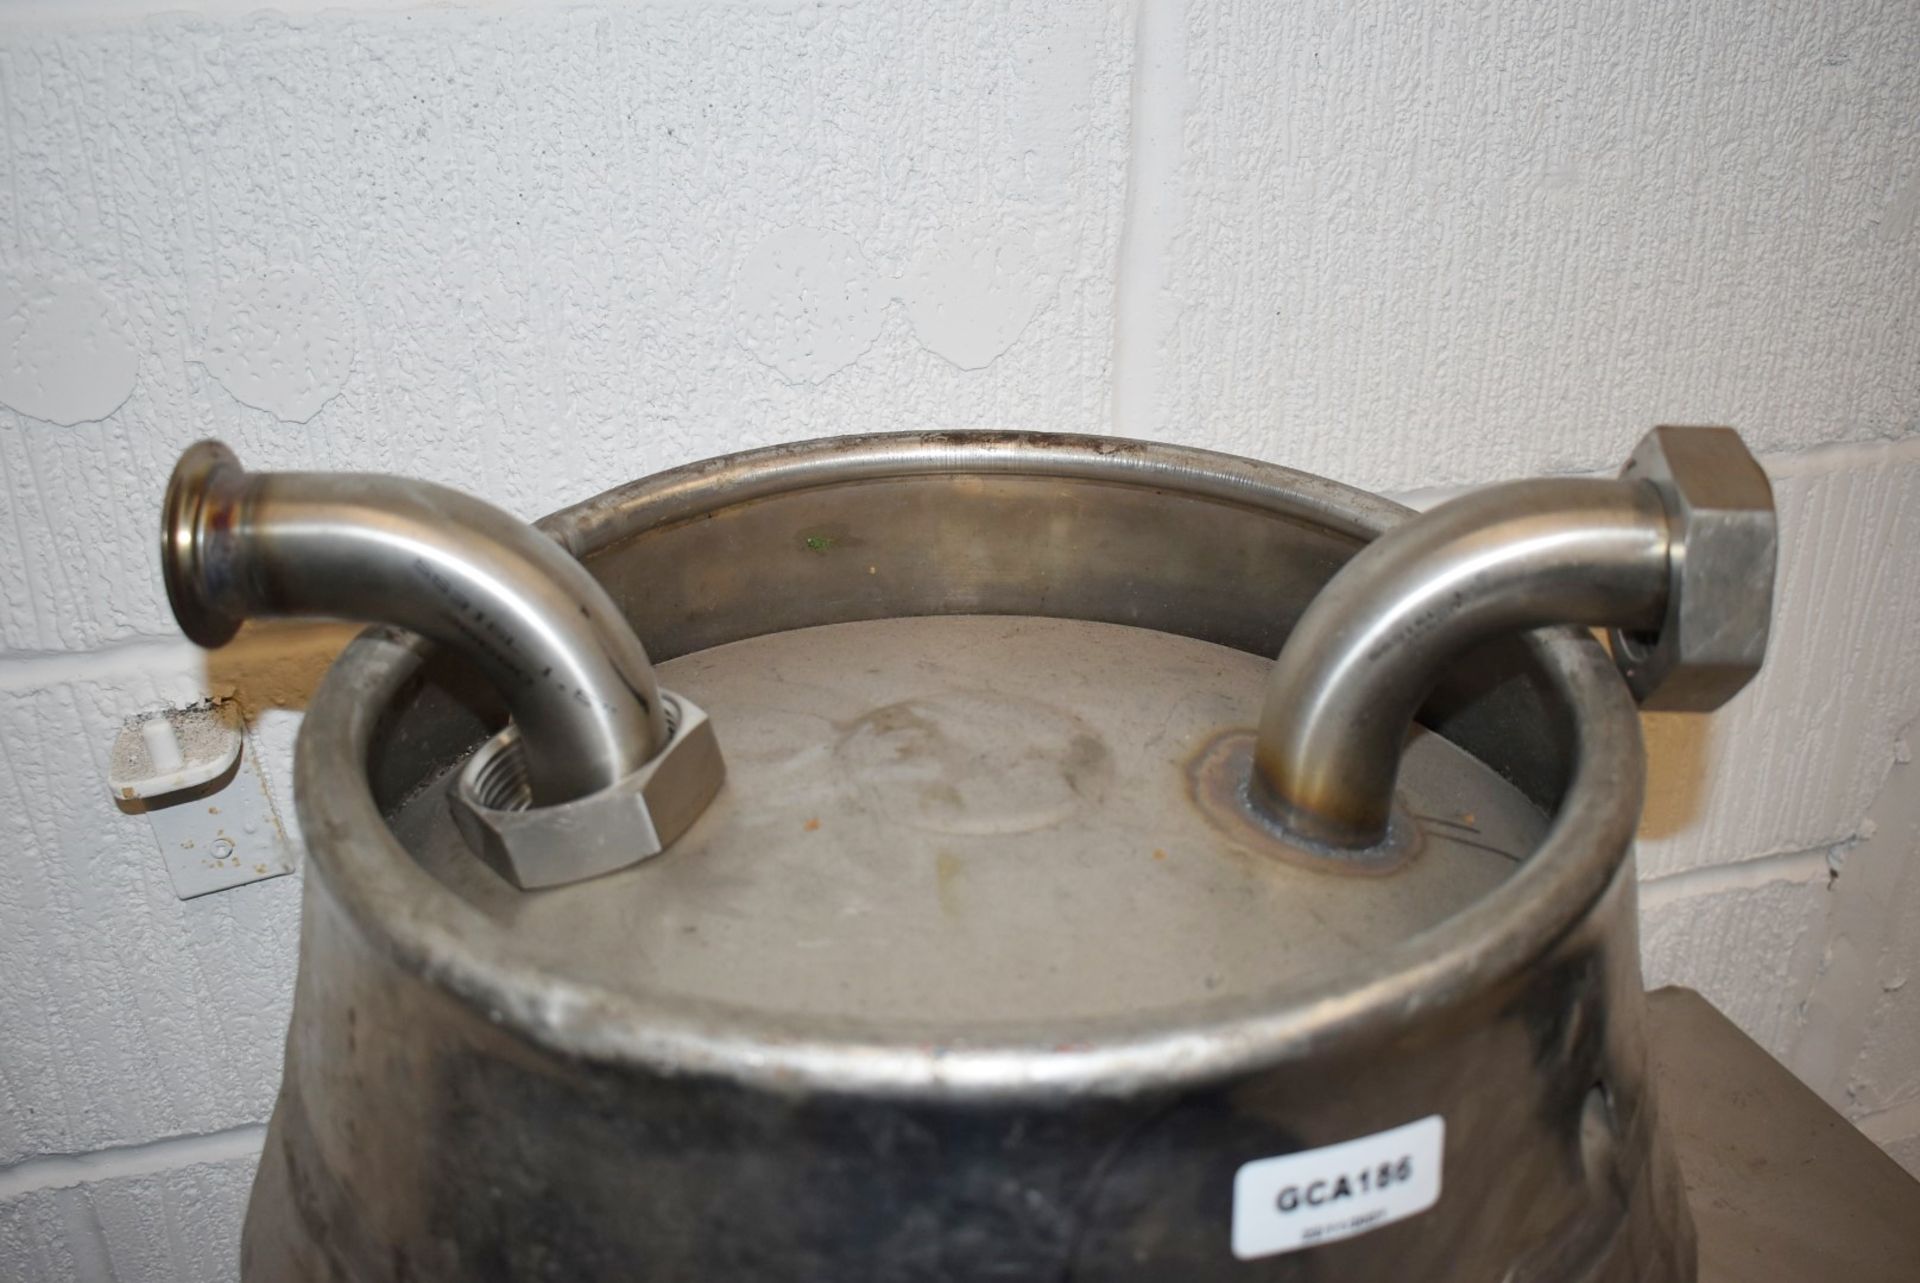 1 x Custom Half Beer Keg With Welded Pipe Fittings - Size: W45 x H37 cms - CL717 - Ref: GCA186 WH5 - - Image 3 of 12